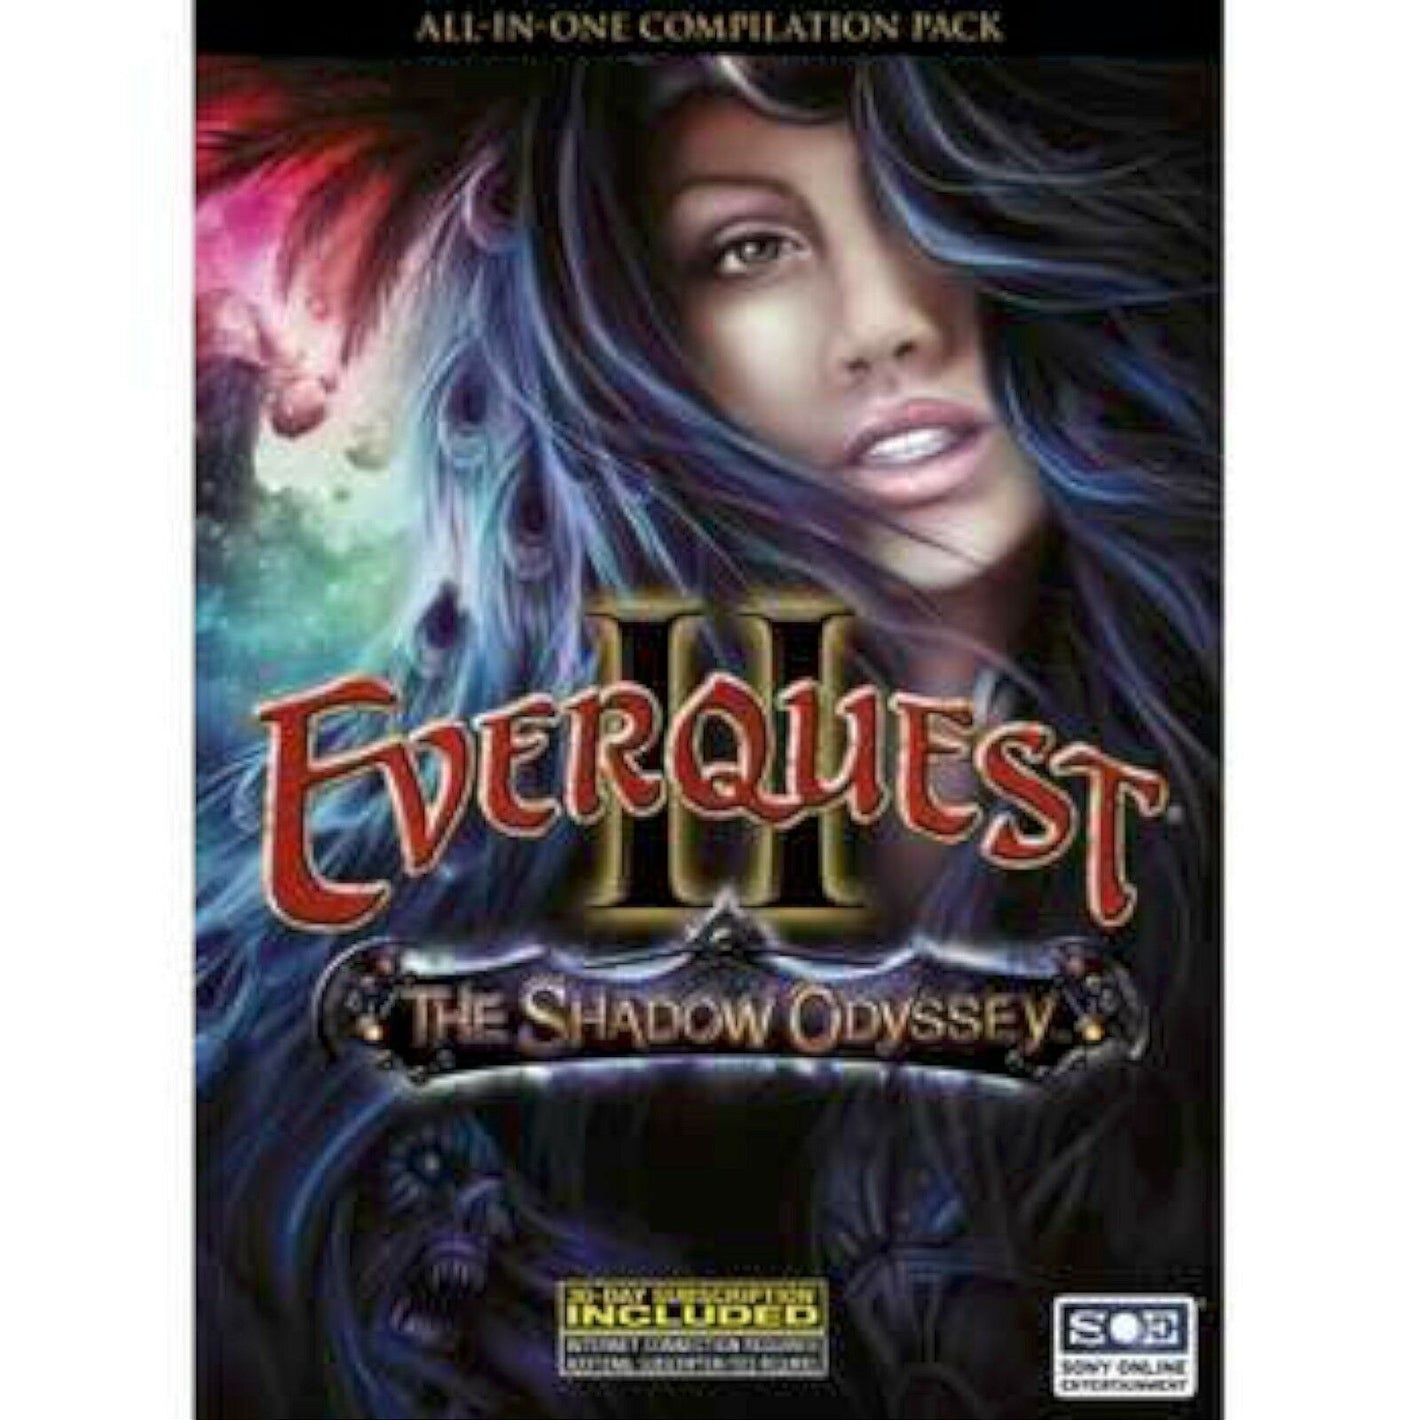 Everquest II 2 The Shadow Odyssey PC MMORPG Game computer DVD-rom Windows [Used/Refurbished]